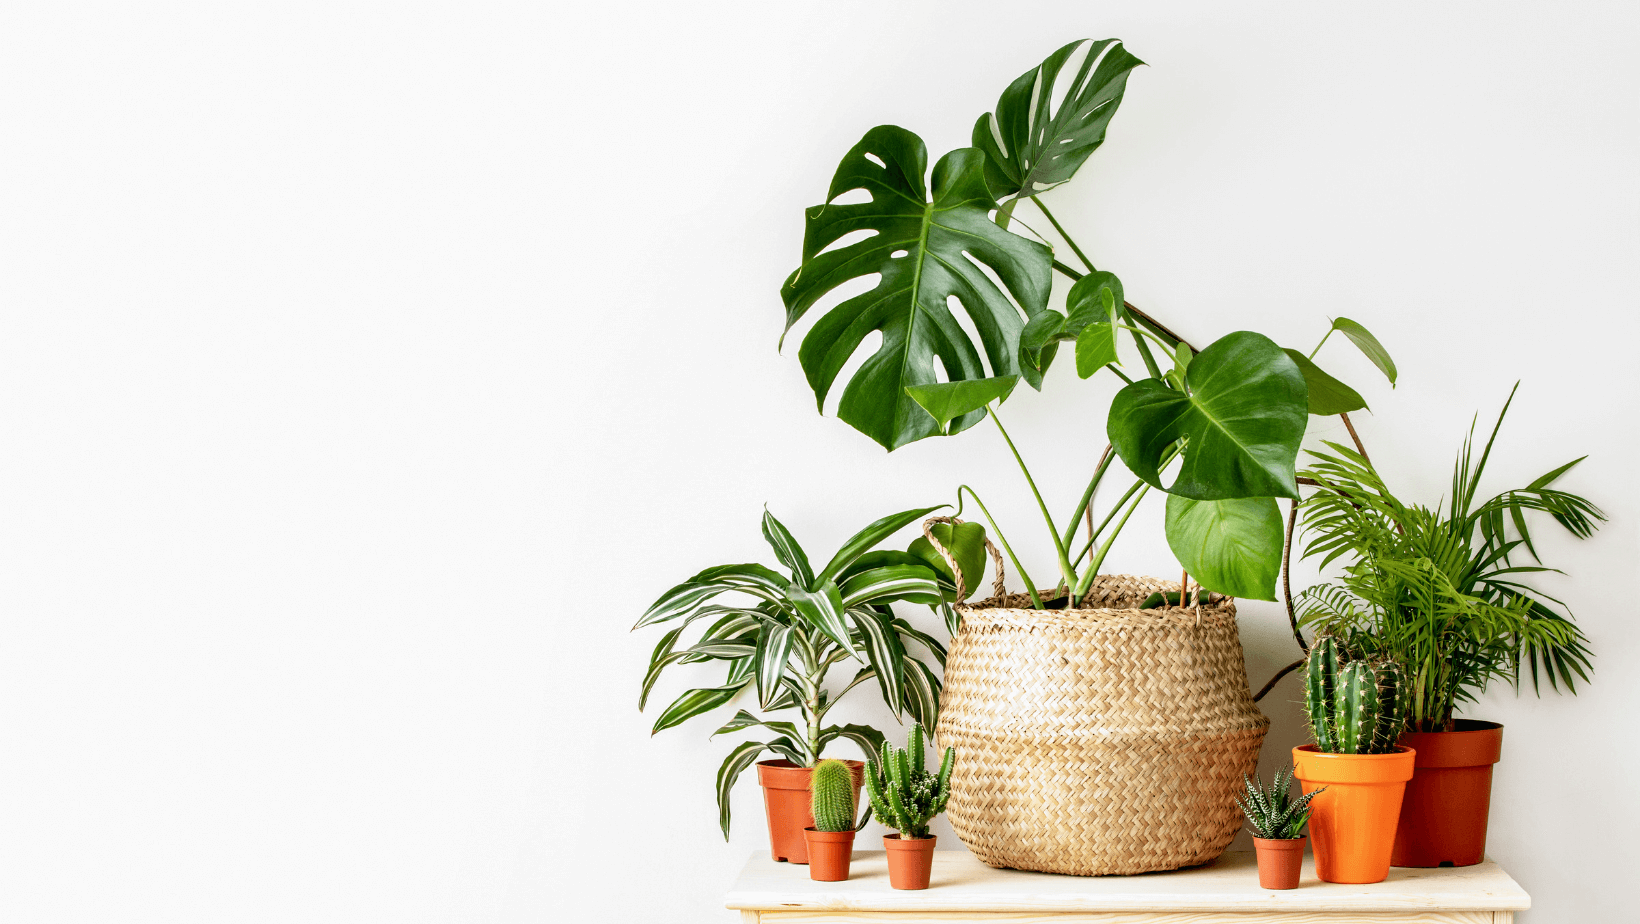 A group of plants consisting of a Monstera in a wooven basket, a medium sized and two smaller cacti in terracotta pots, a parlor palm and white jewel dracaena in a plastic pot, all in front of a white background.